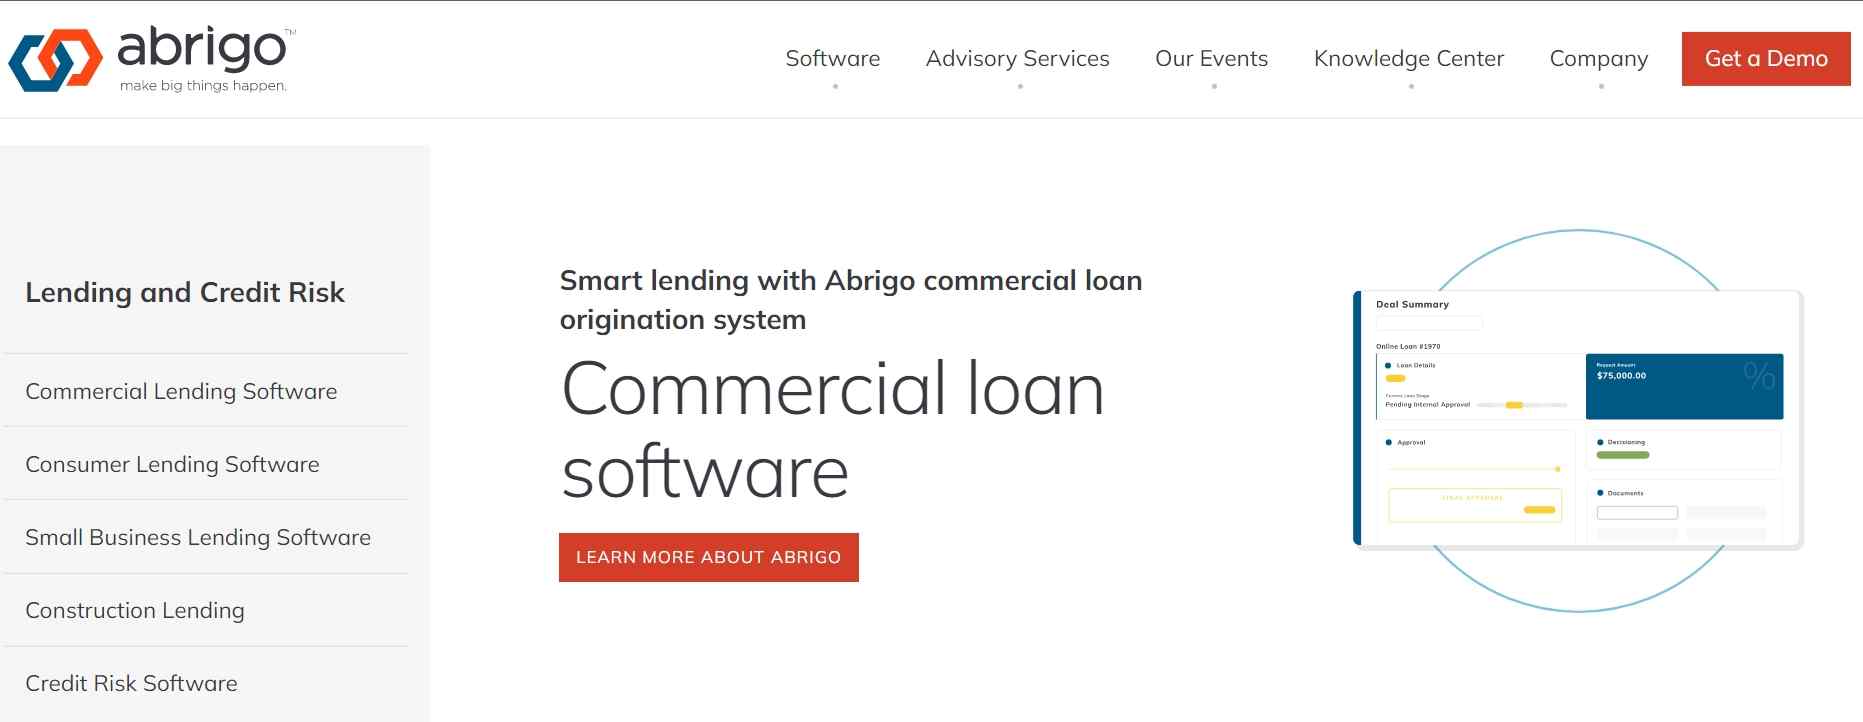 Sageworks Lending Solutions is a financial technology company that helps banks and other financial institutions with automated loan origination, credit scoring, and portfolio analytics.